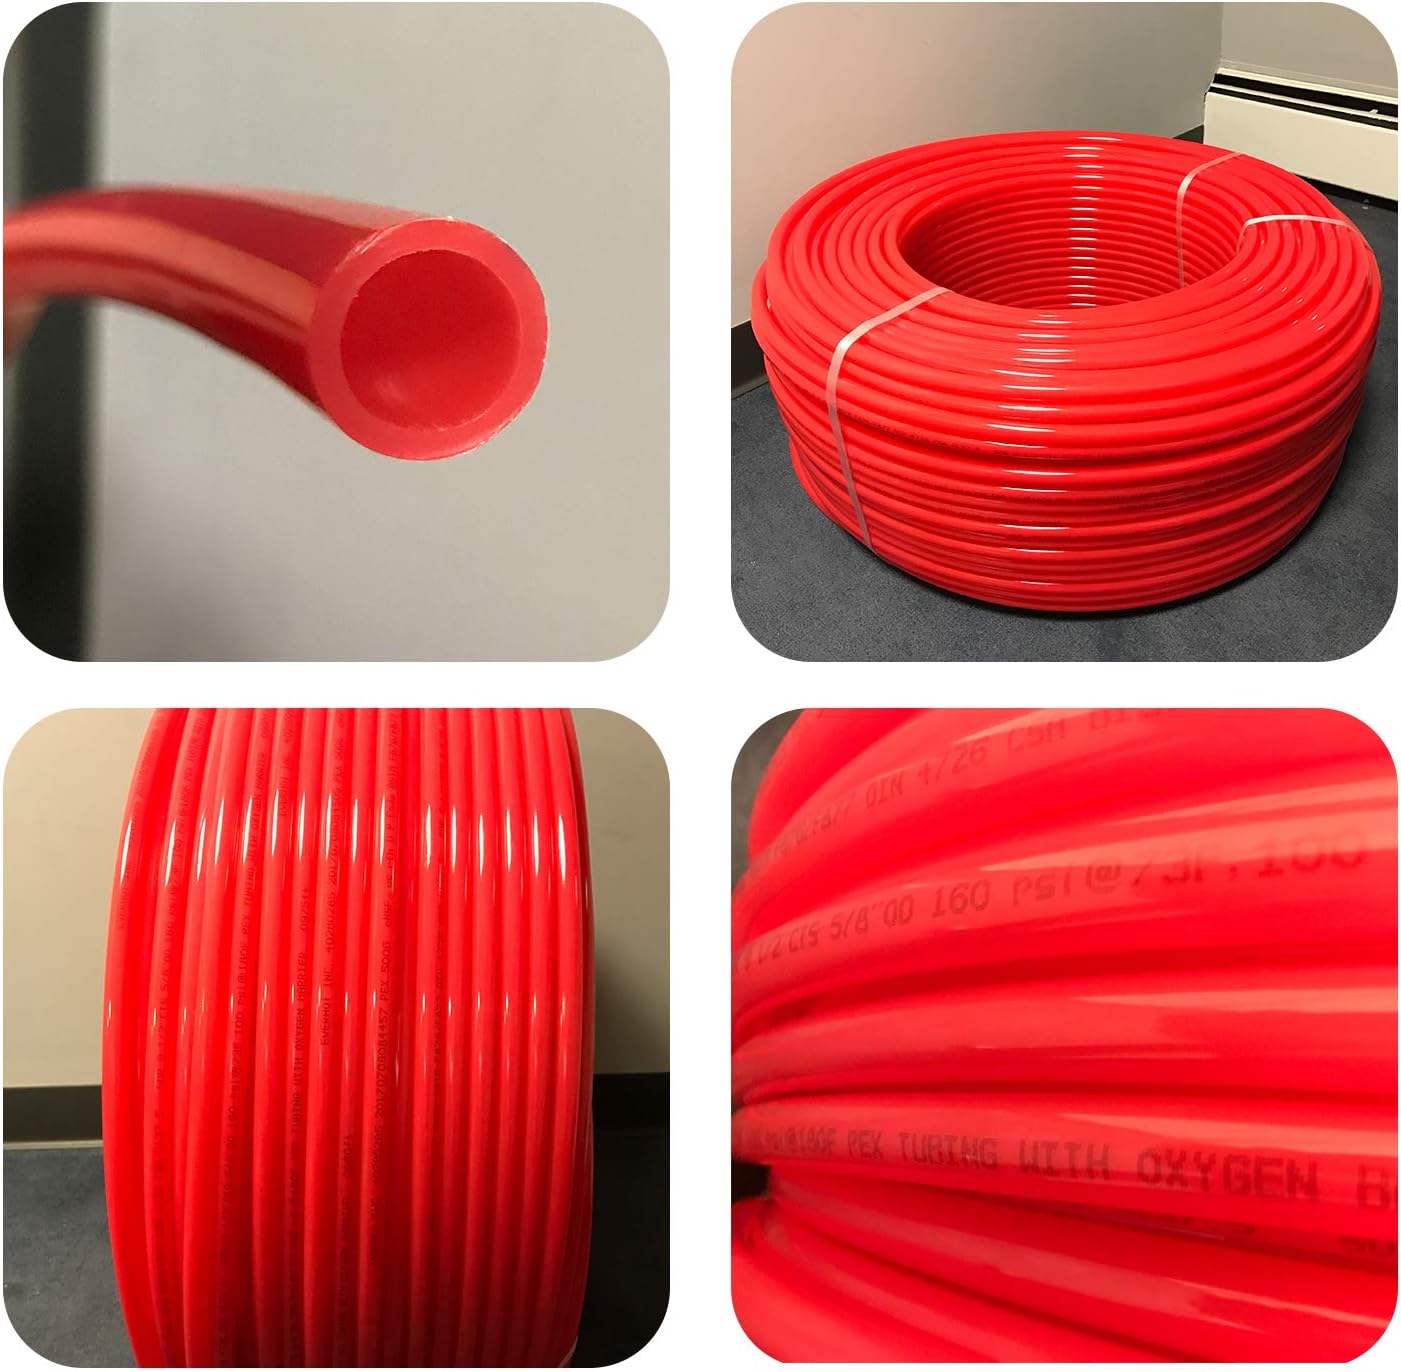 1/2 x 300' PEX-A Potable Water - 300' Coil - Red